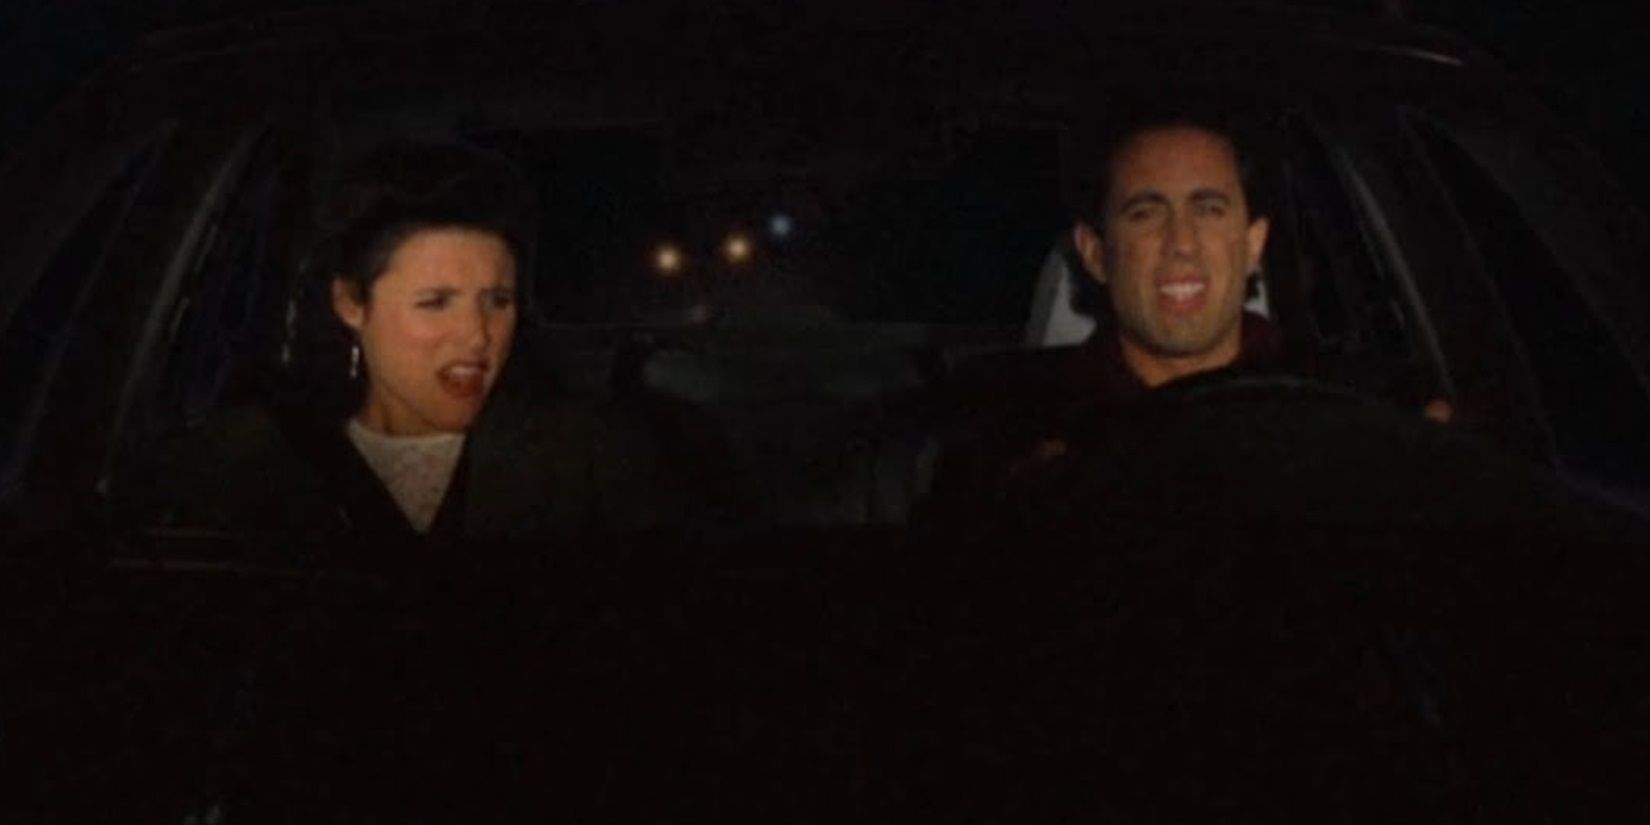 Jerry and Elaine in a smelly car in Seinfeld